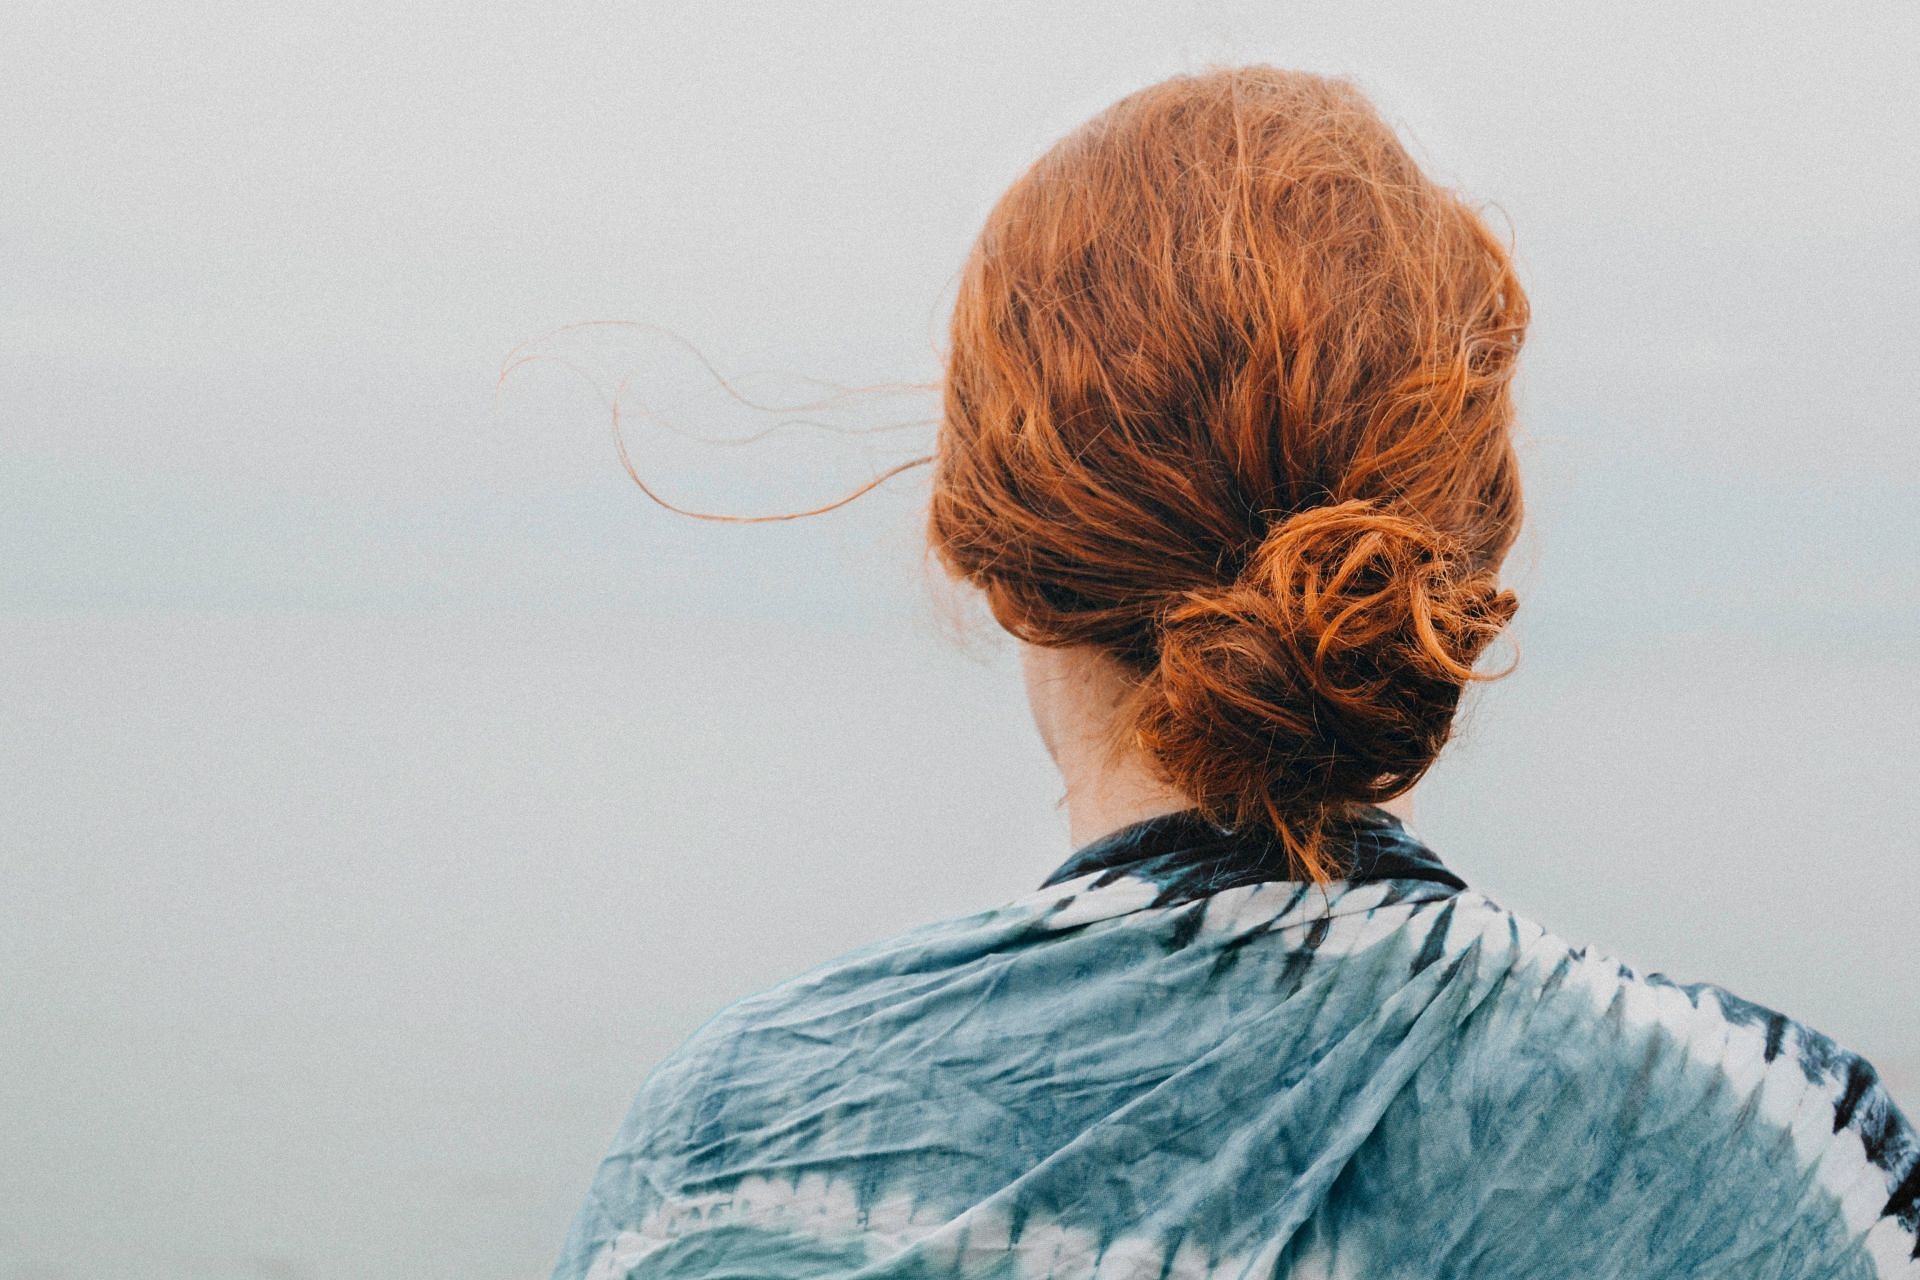 manages dry and brittle hair. (image via unsplash / tyler mcrobert)